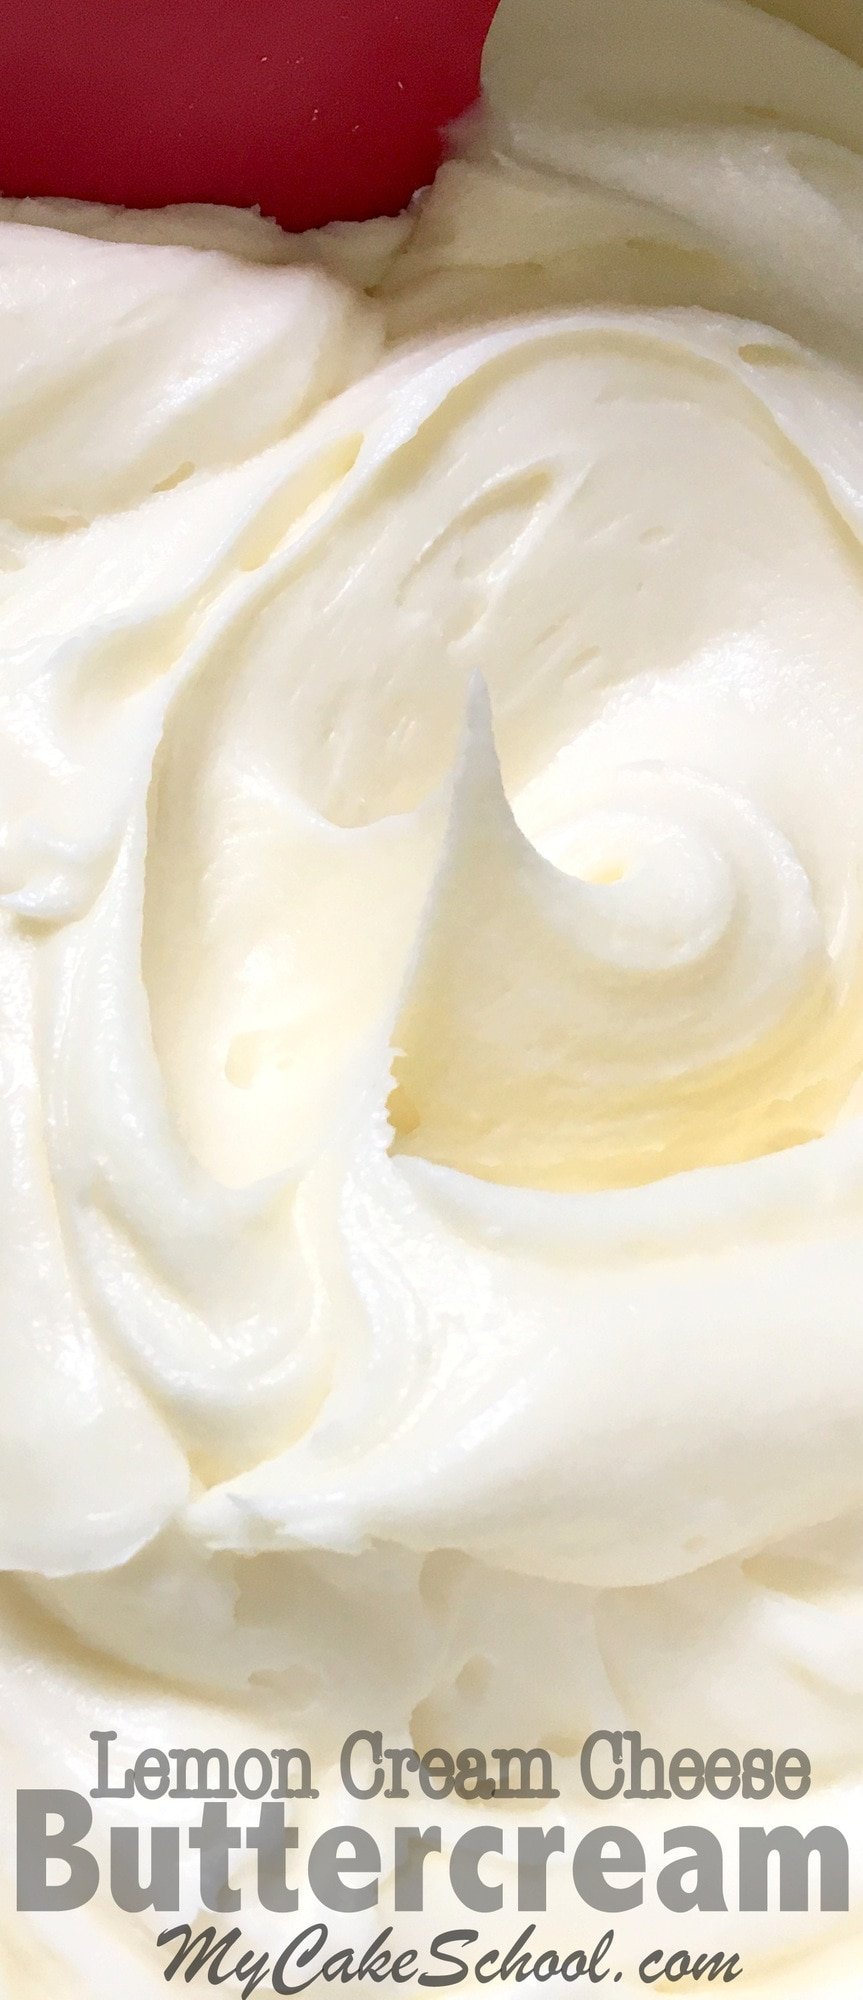 What is an effective way to freeze cream cheese?